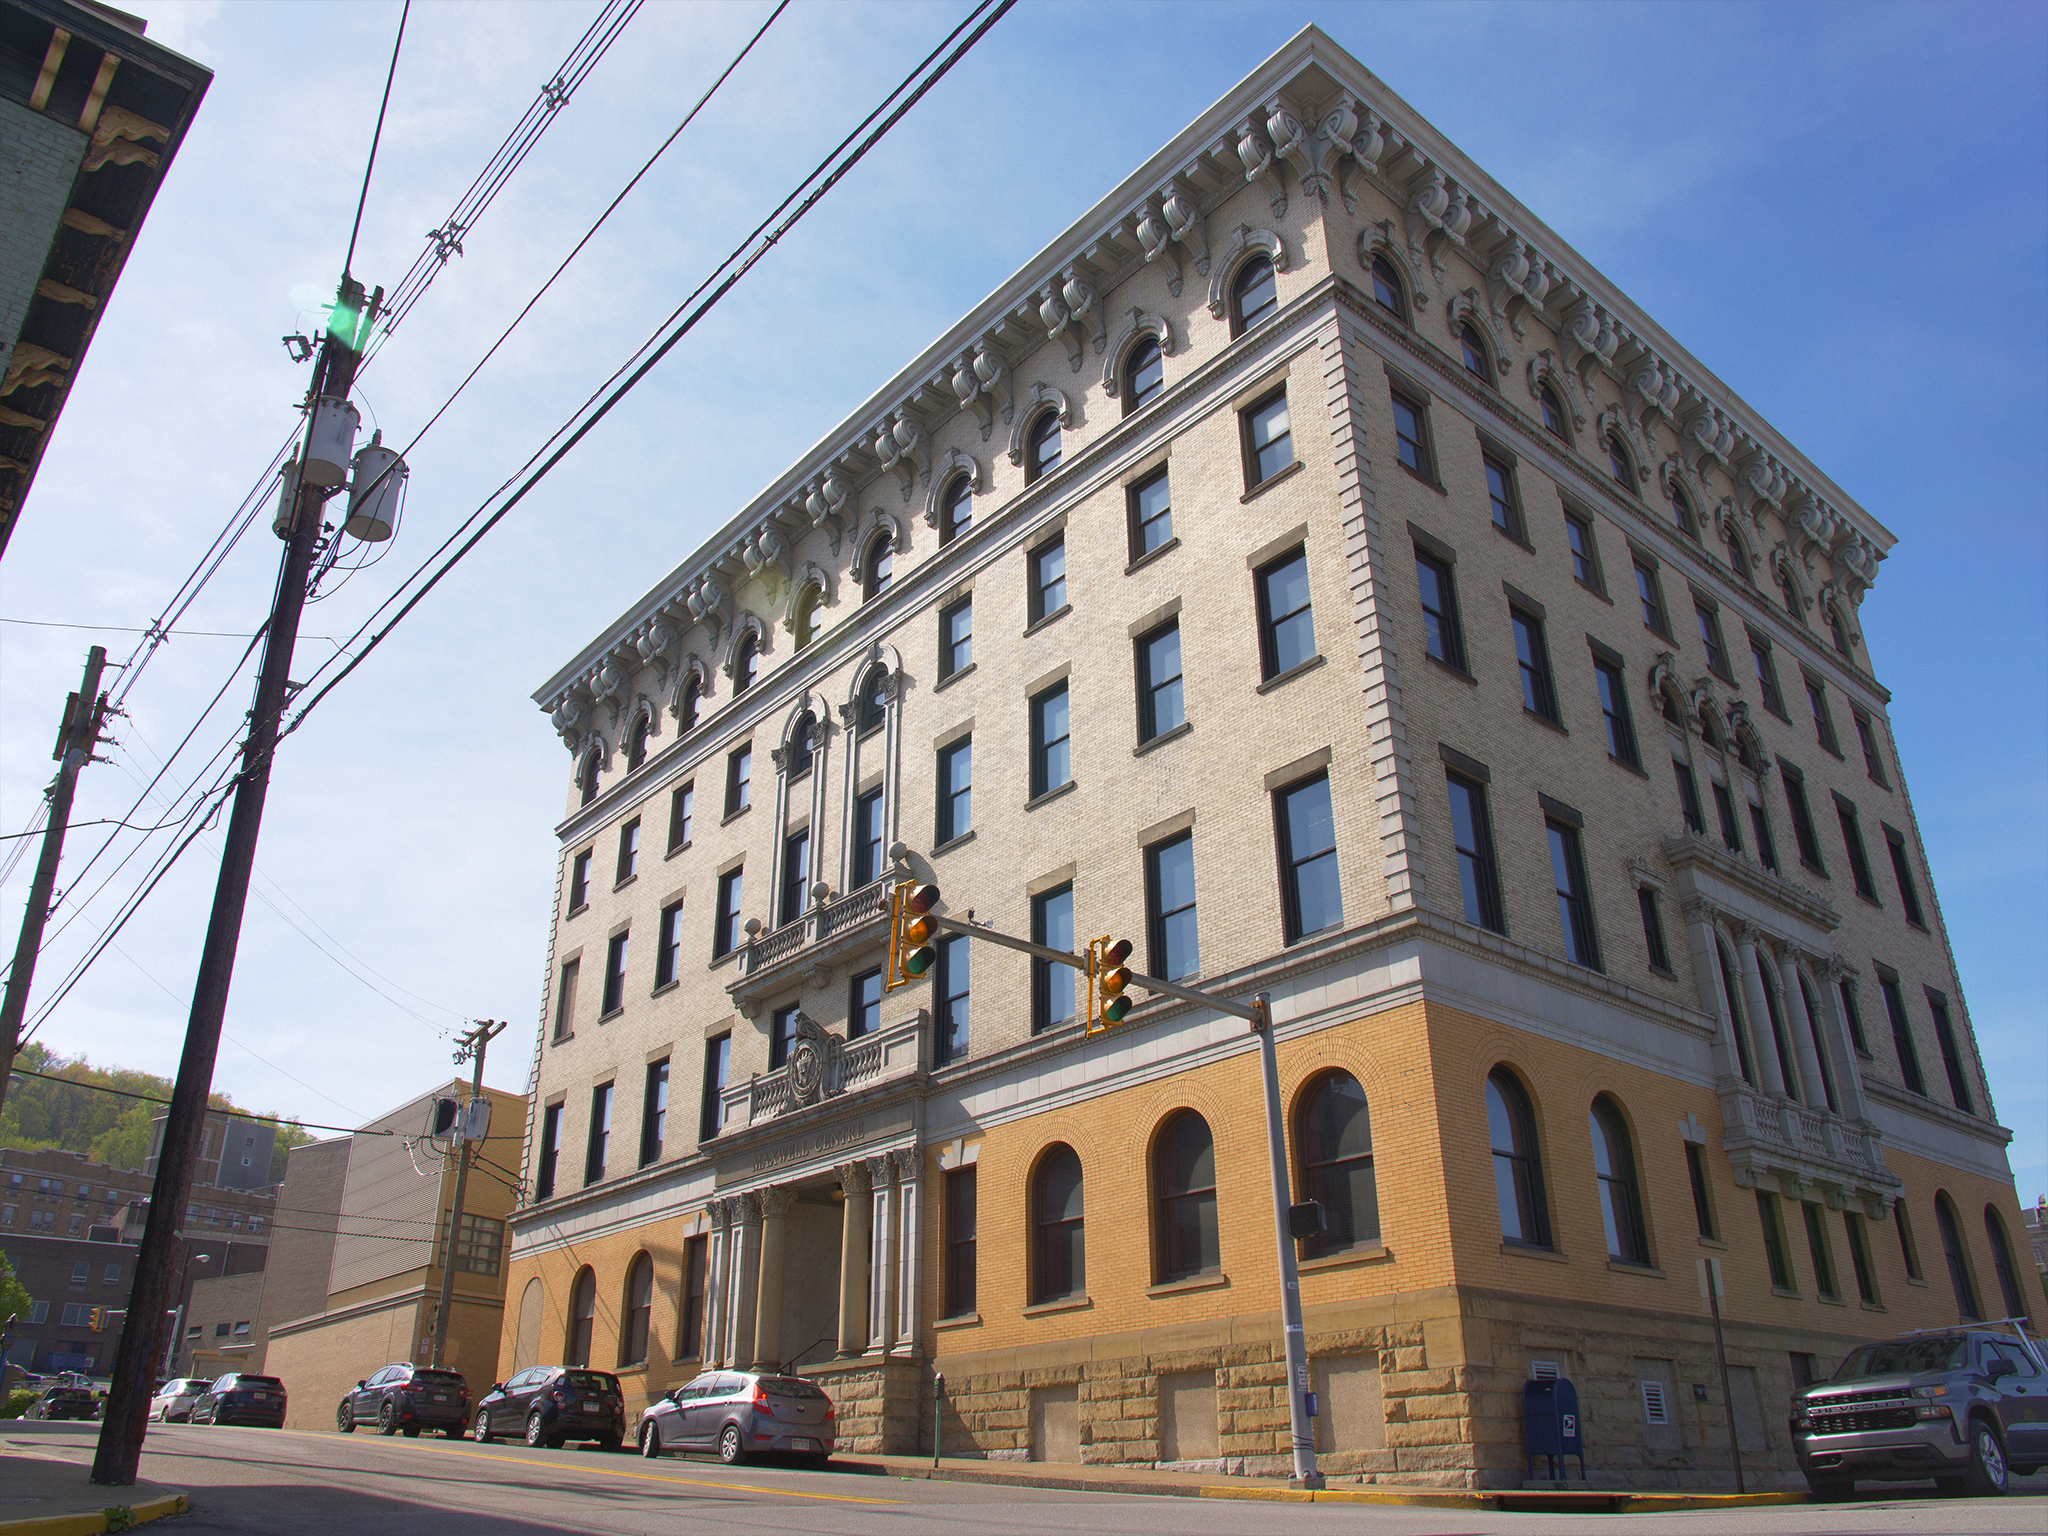 A development group consisting of McKinley & Associates, Inc.; Bodkin Wilson & Kozicki, PLLC; Schrader Byrd & Companion, PLLC.; and Hartley, O’Brien, Parsons, Thomson & Hill. Recognized for the rehabilitation of the former YMCA into the Maxwell Centre, the restoration of the Wagner Building, and the economic impact that was created by these investments.